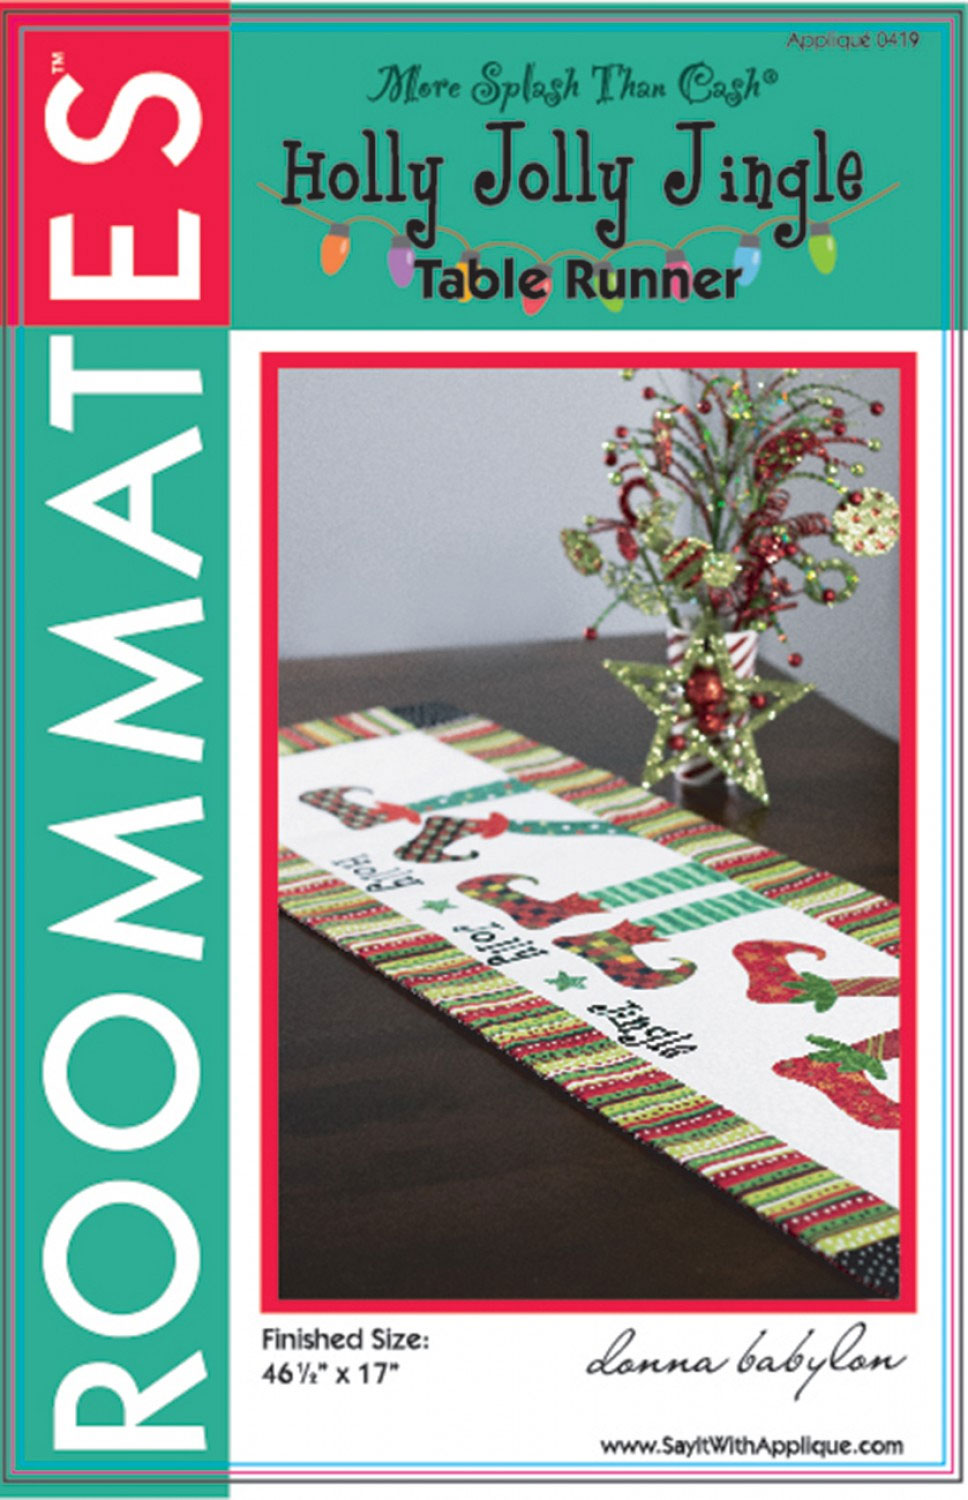 Holly-Jolly-Jingle-Table-Runner-sewing-pattern-More-Splash-Than-Cash-front